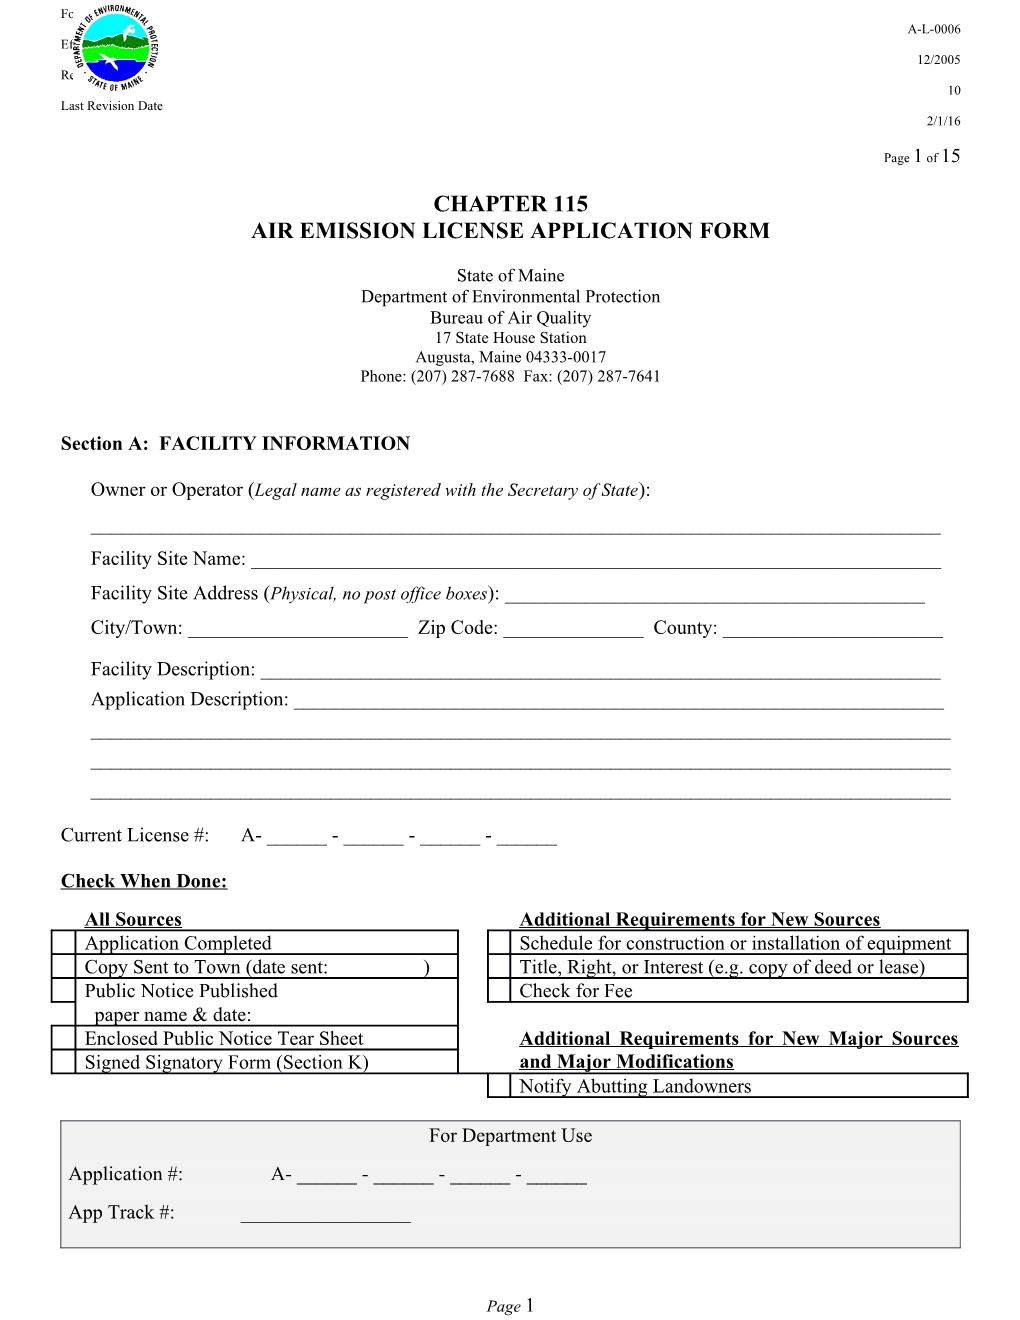 Chapter 115 Air Emission License Application